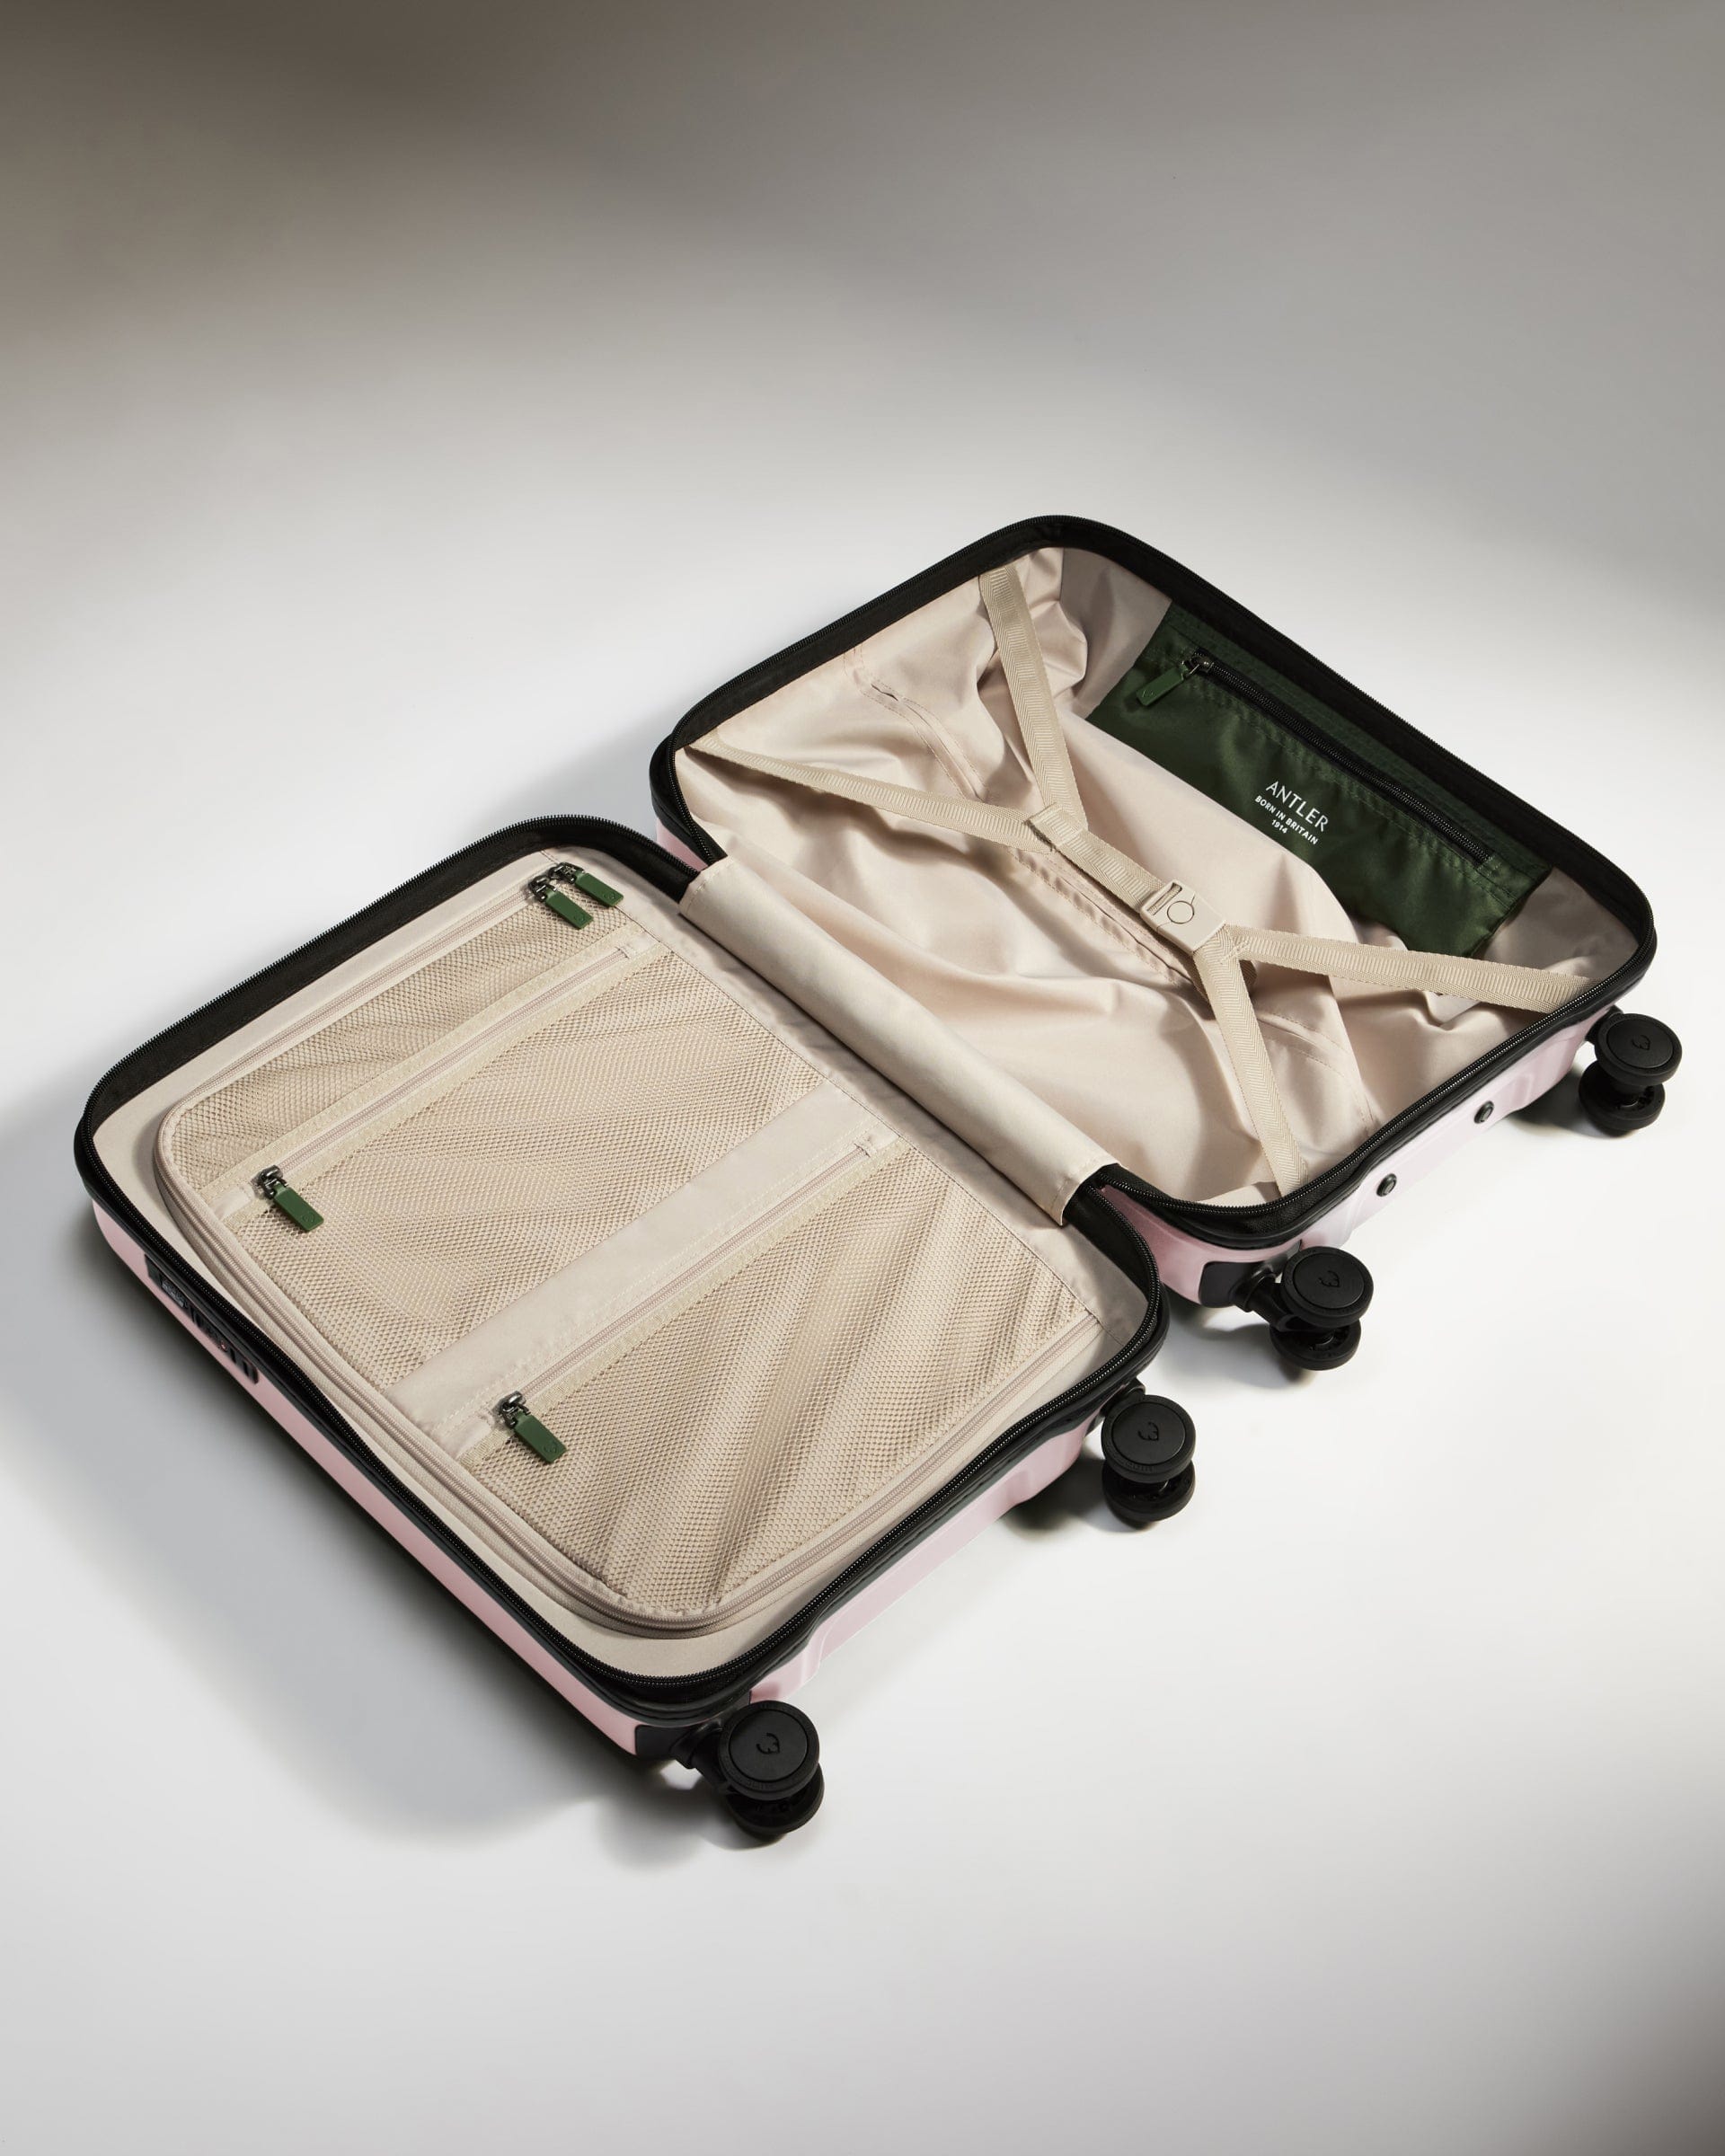 Antler Luggage -  Icon Stripe Cabin in Moorland Pink - Hard Suitcase Icon Stripe Cabin in Pink | Lightweight & Hard Shell Suitcase | Cabin Bag